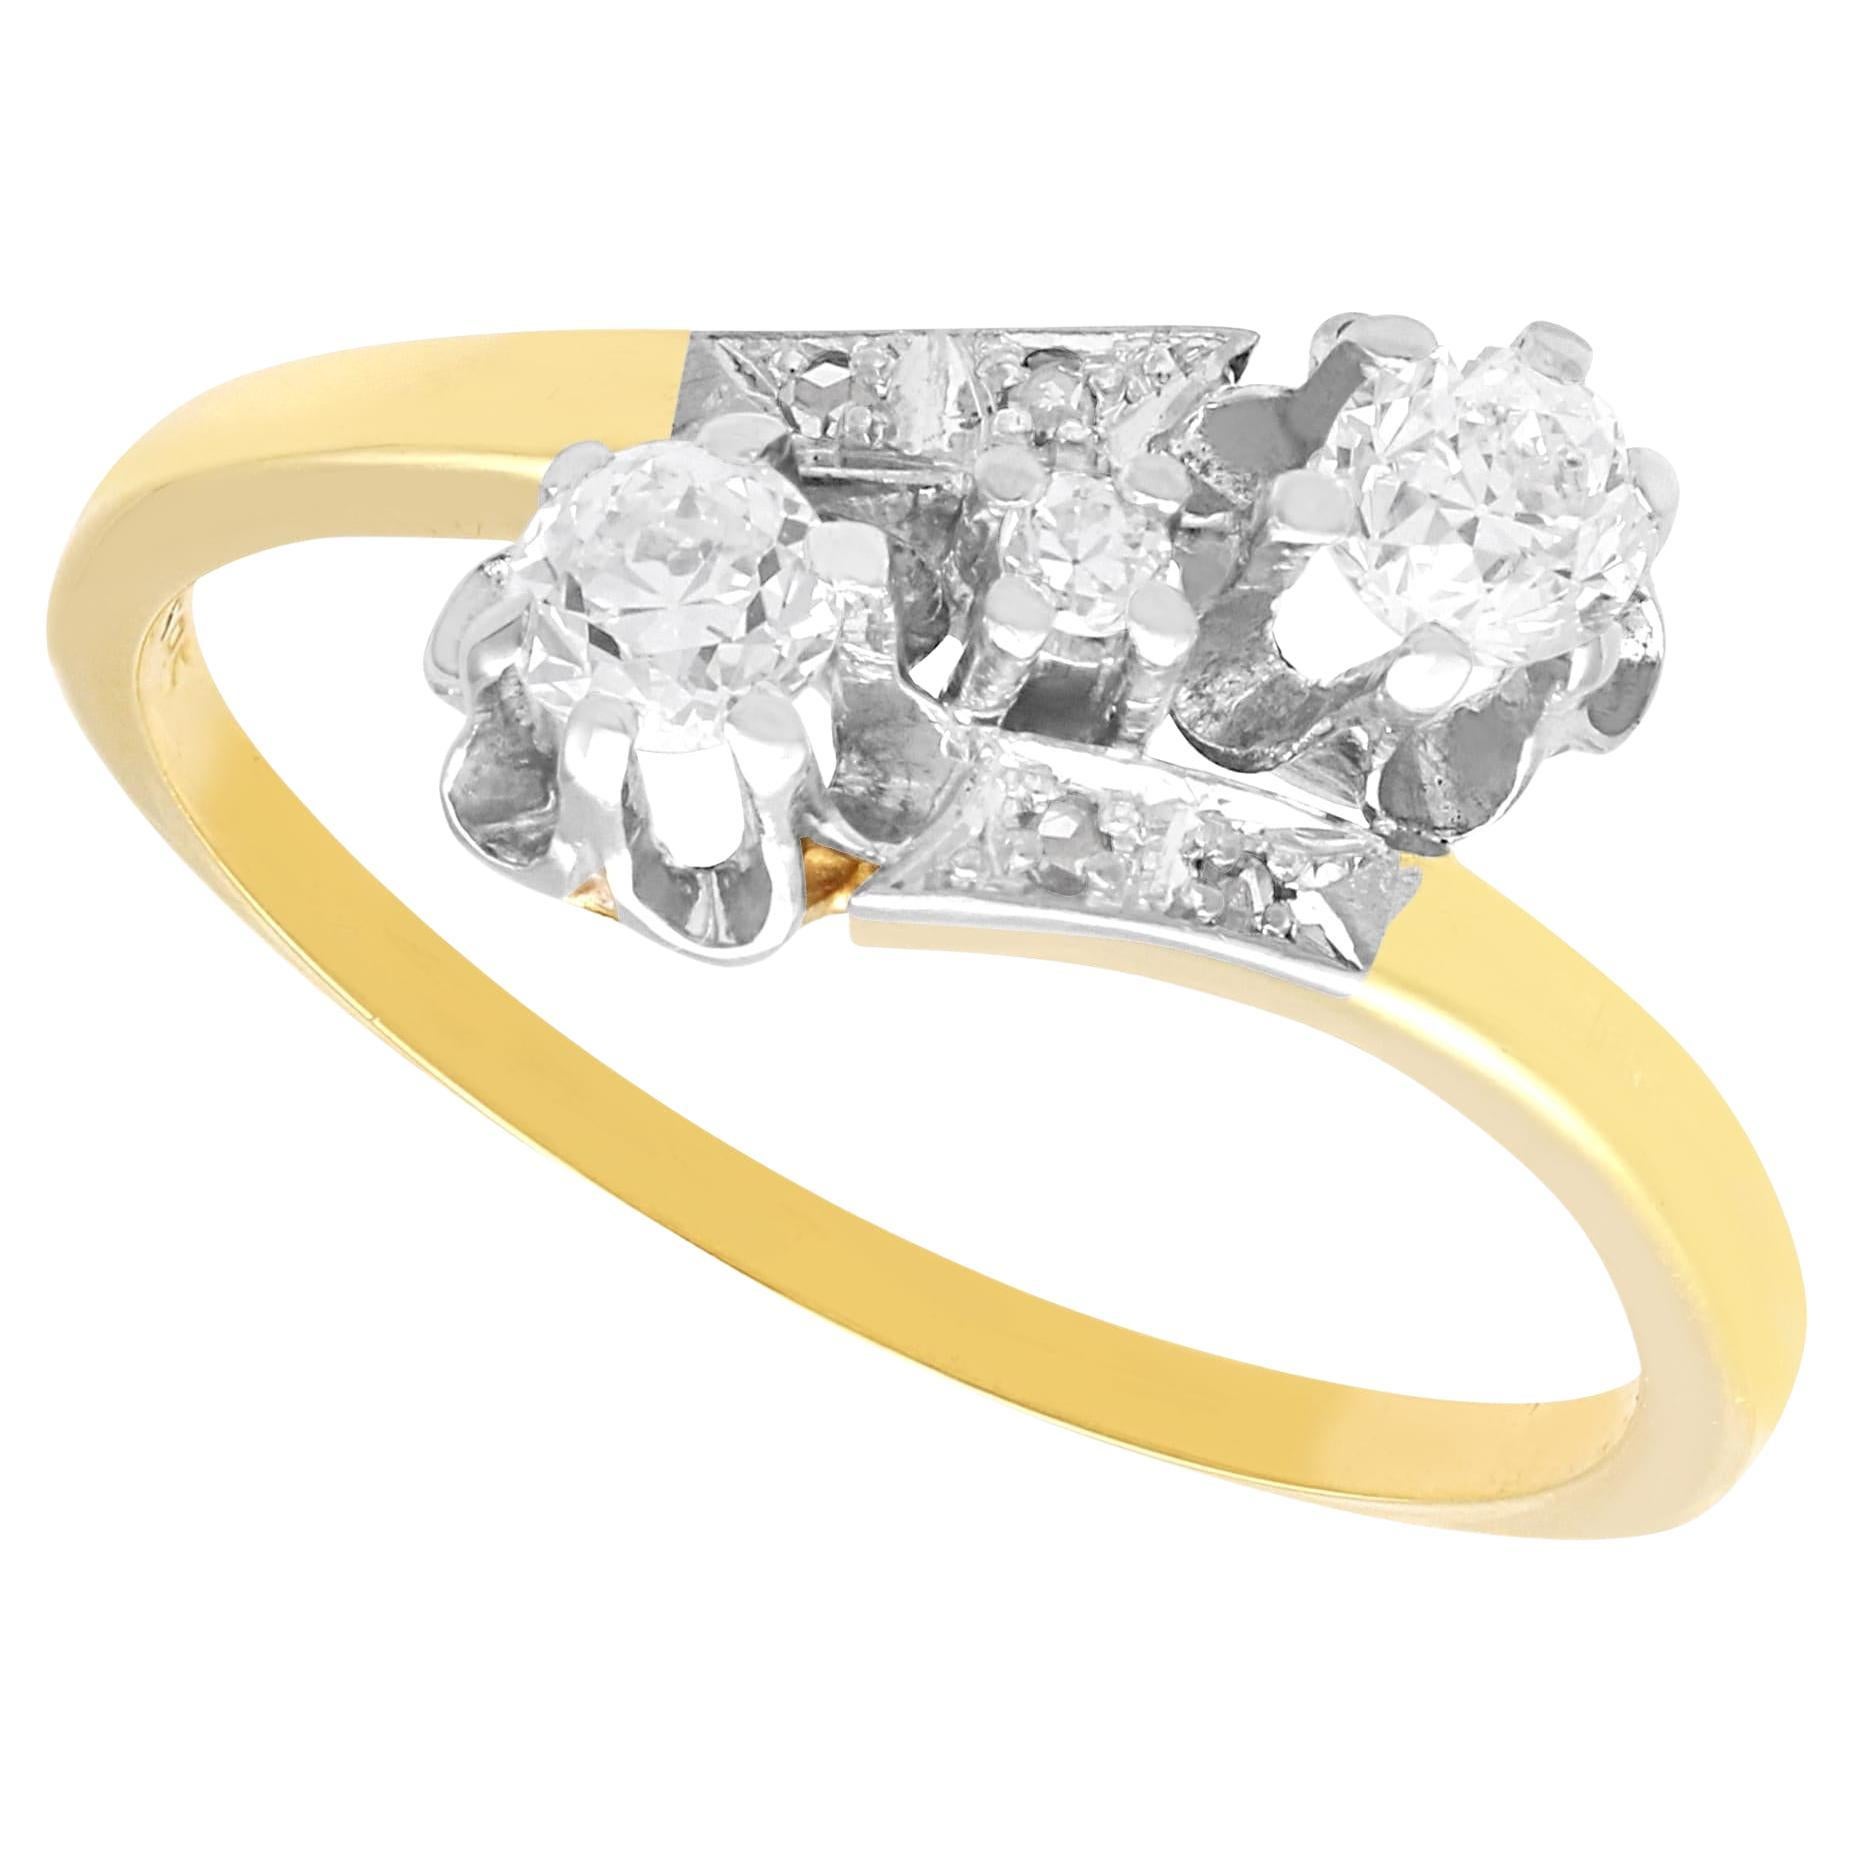 1920s 0.41 Carat Diamond and 14k Yellow Gold Twist Ring For Sale